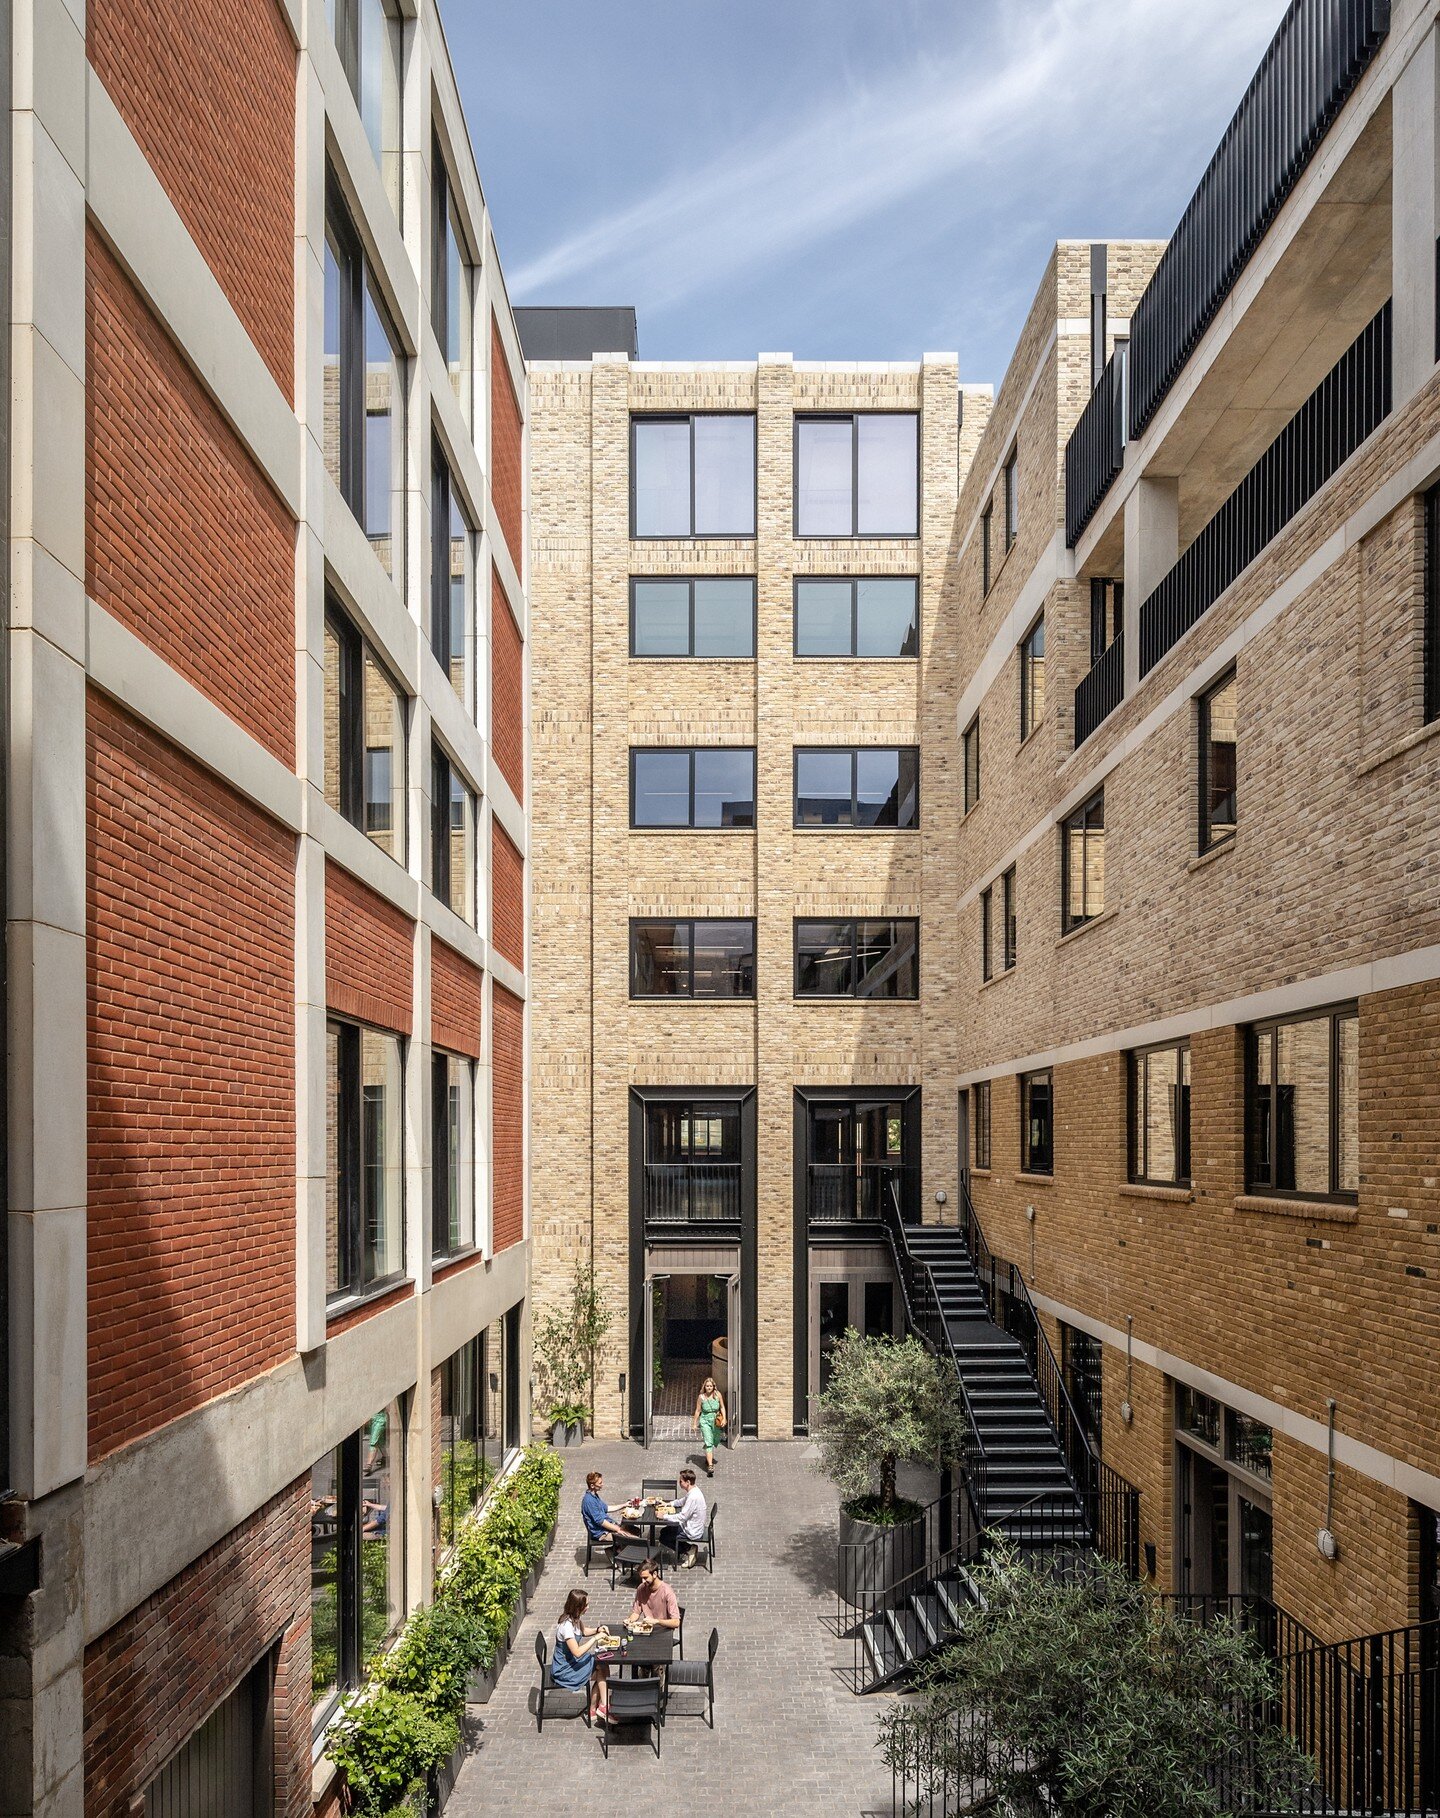 Great Suffolk Yard is a workplace project in the Liberty of the Mint Conservation Area in Borough, London, where we have worked collaboratively with our client @tailored_living_solutions from initial conversations in 2018, through planning, construct